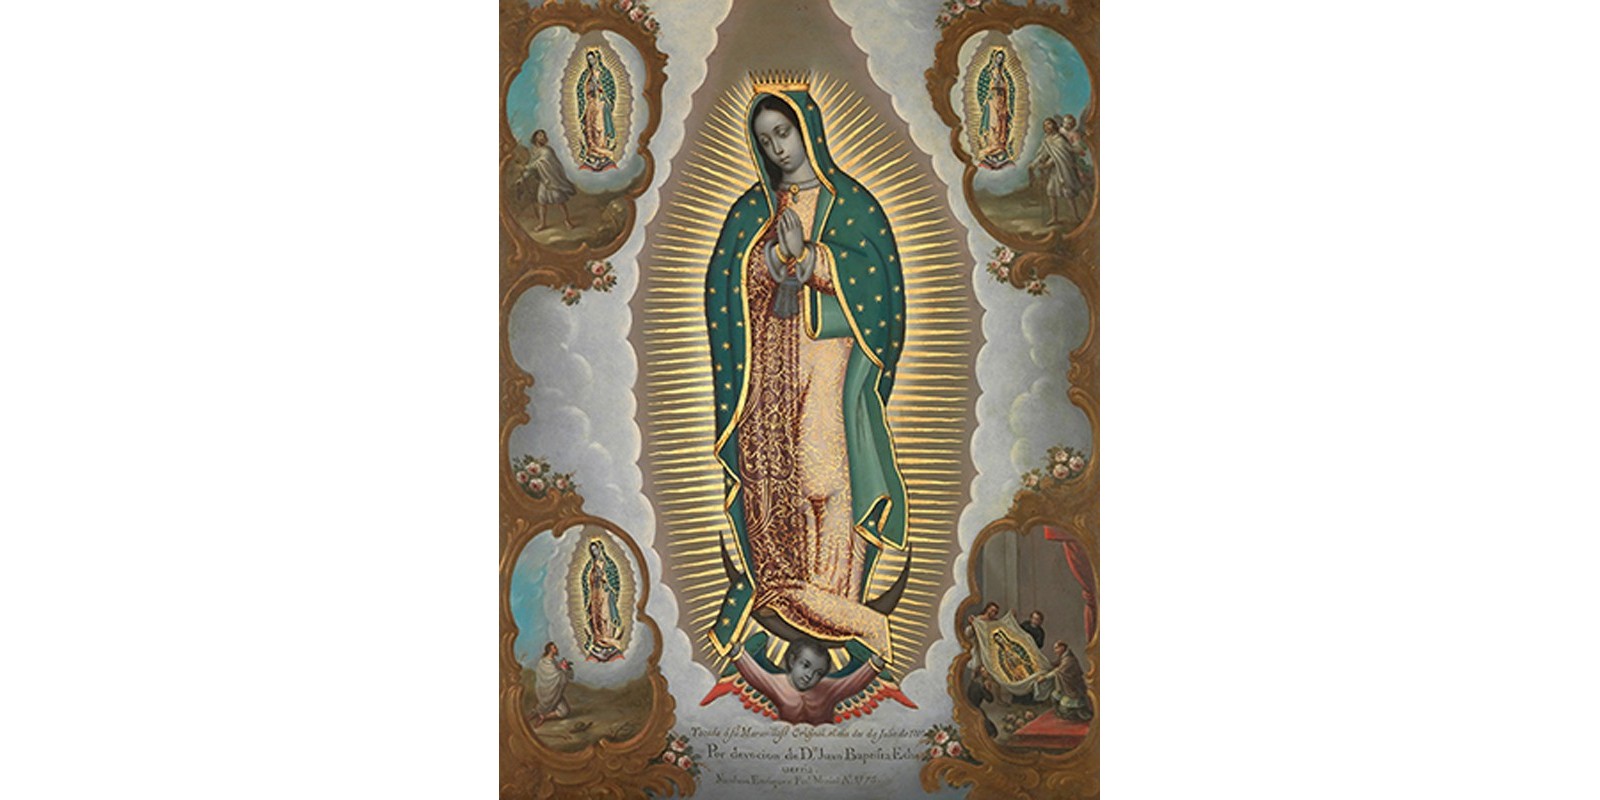 Nicolas Enriquez - The Virgin of Guadalupe with the Four Apparitions